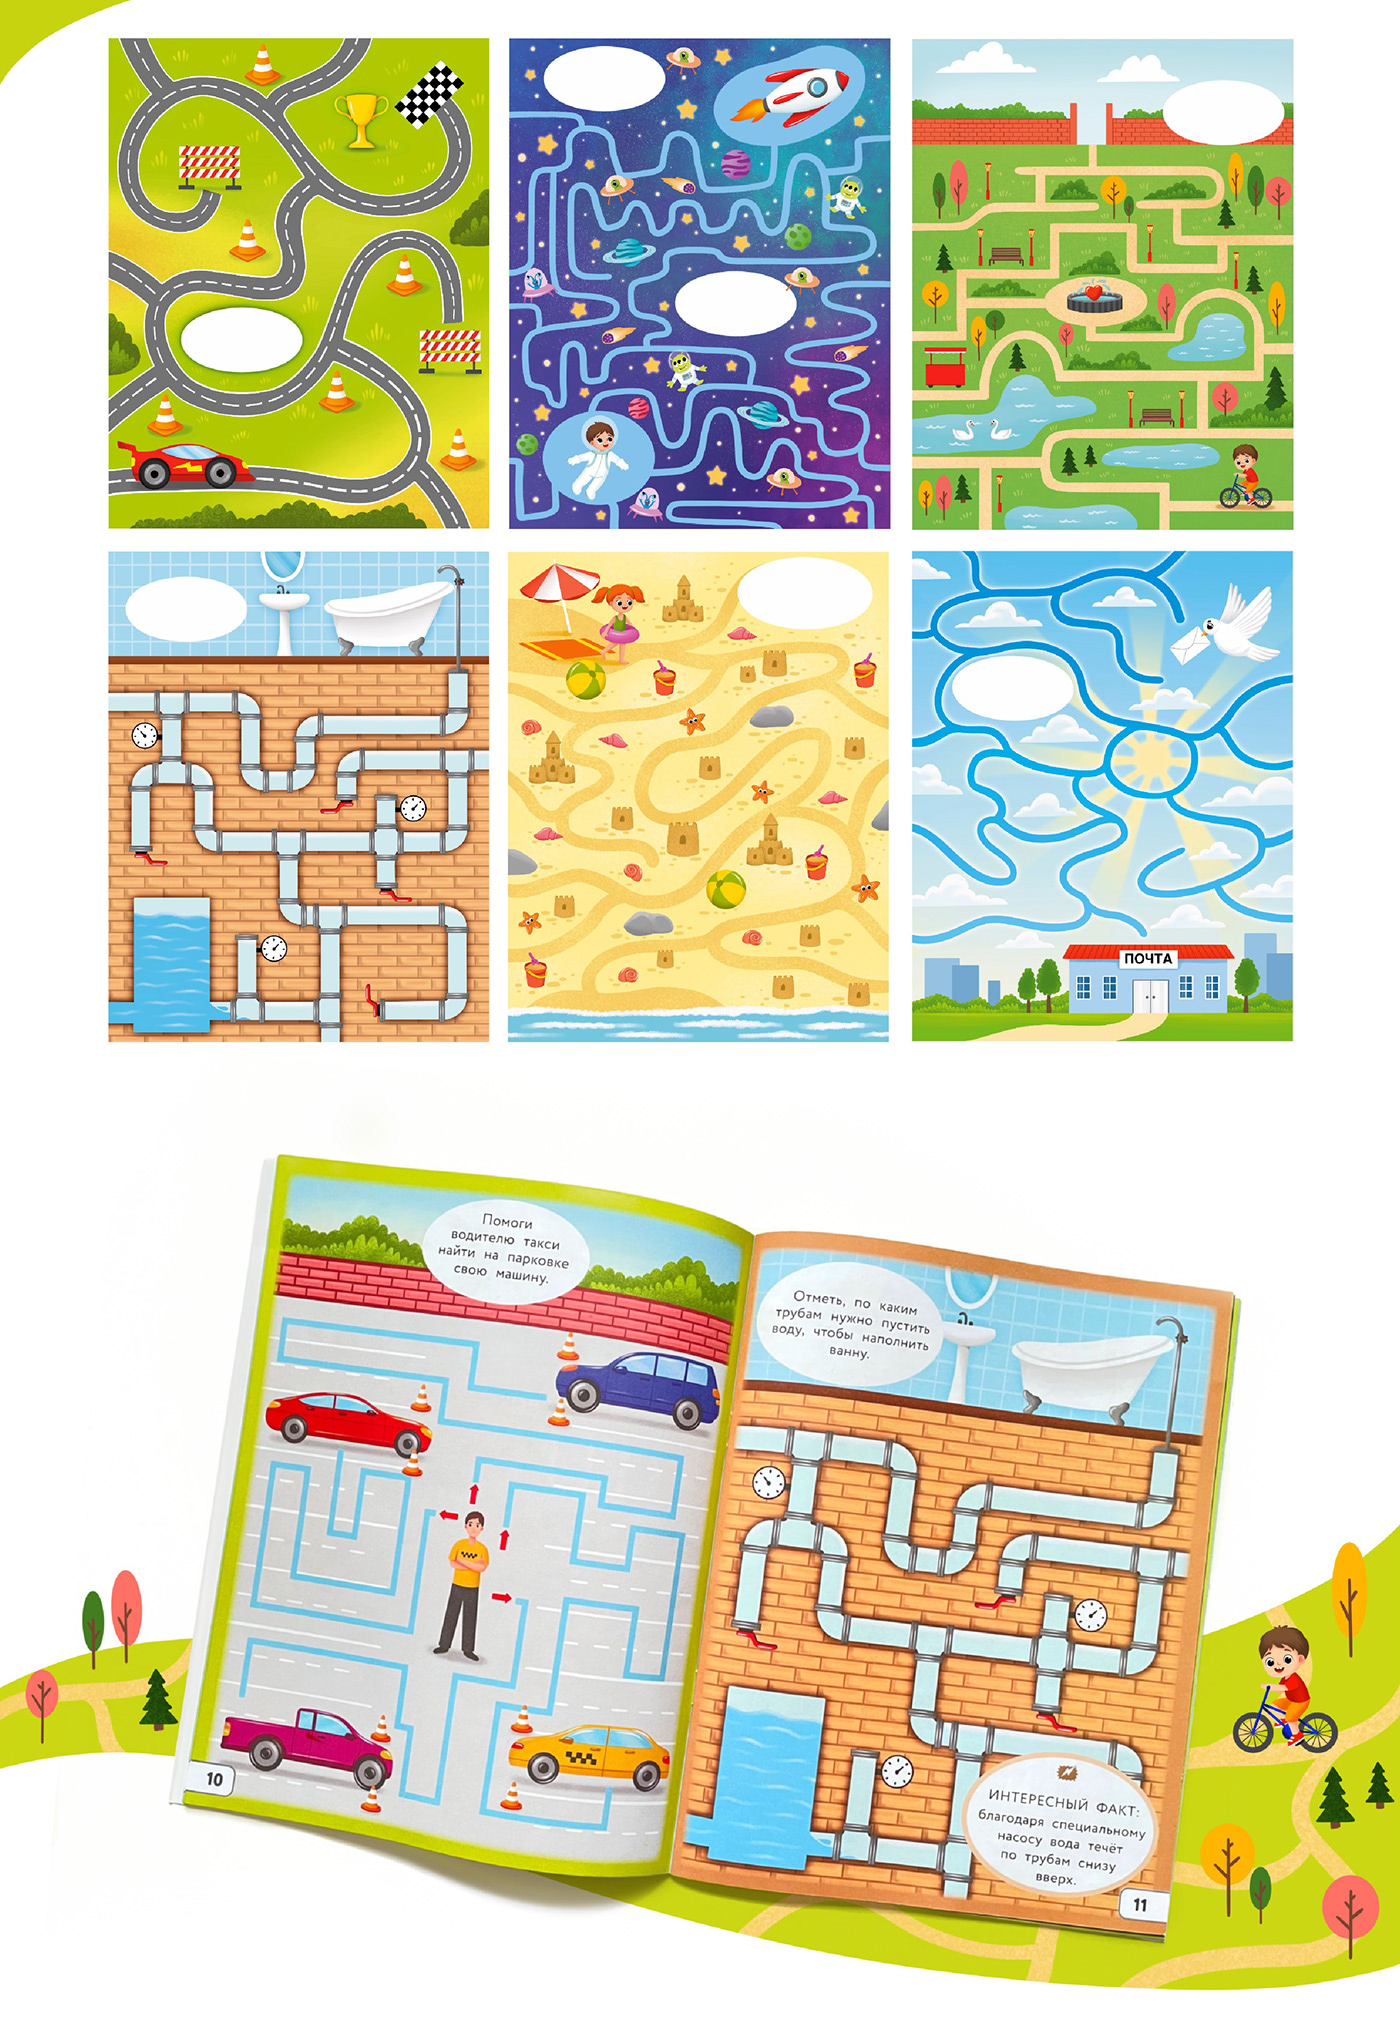 Labyrinths for young children